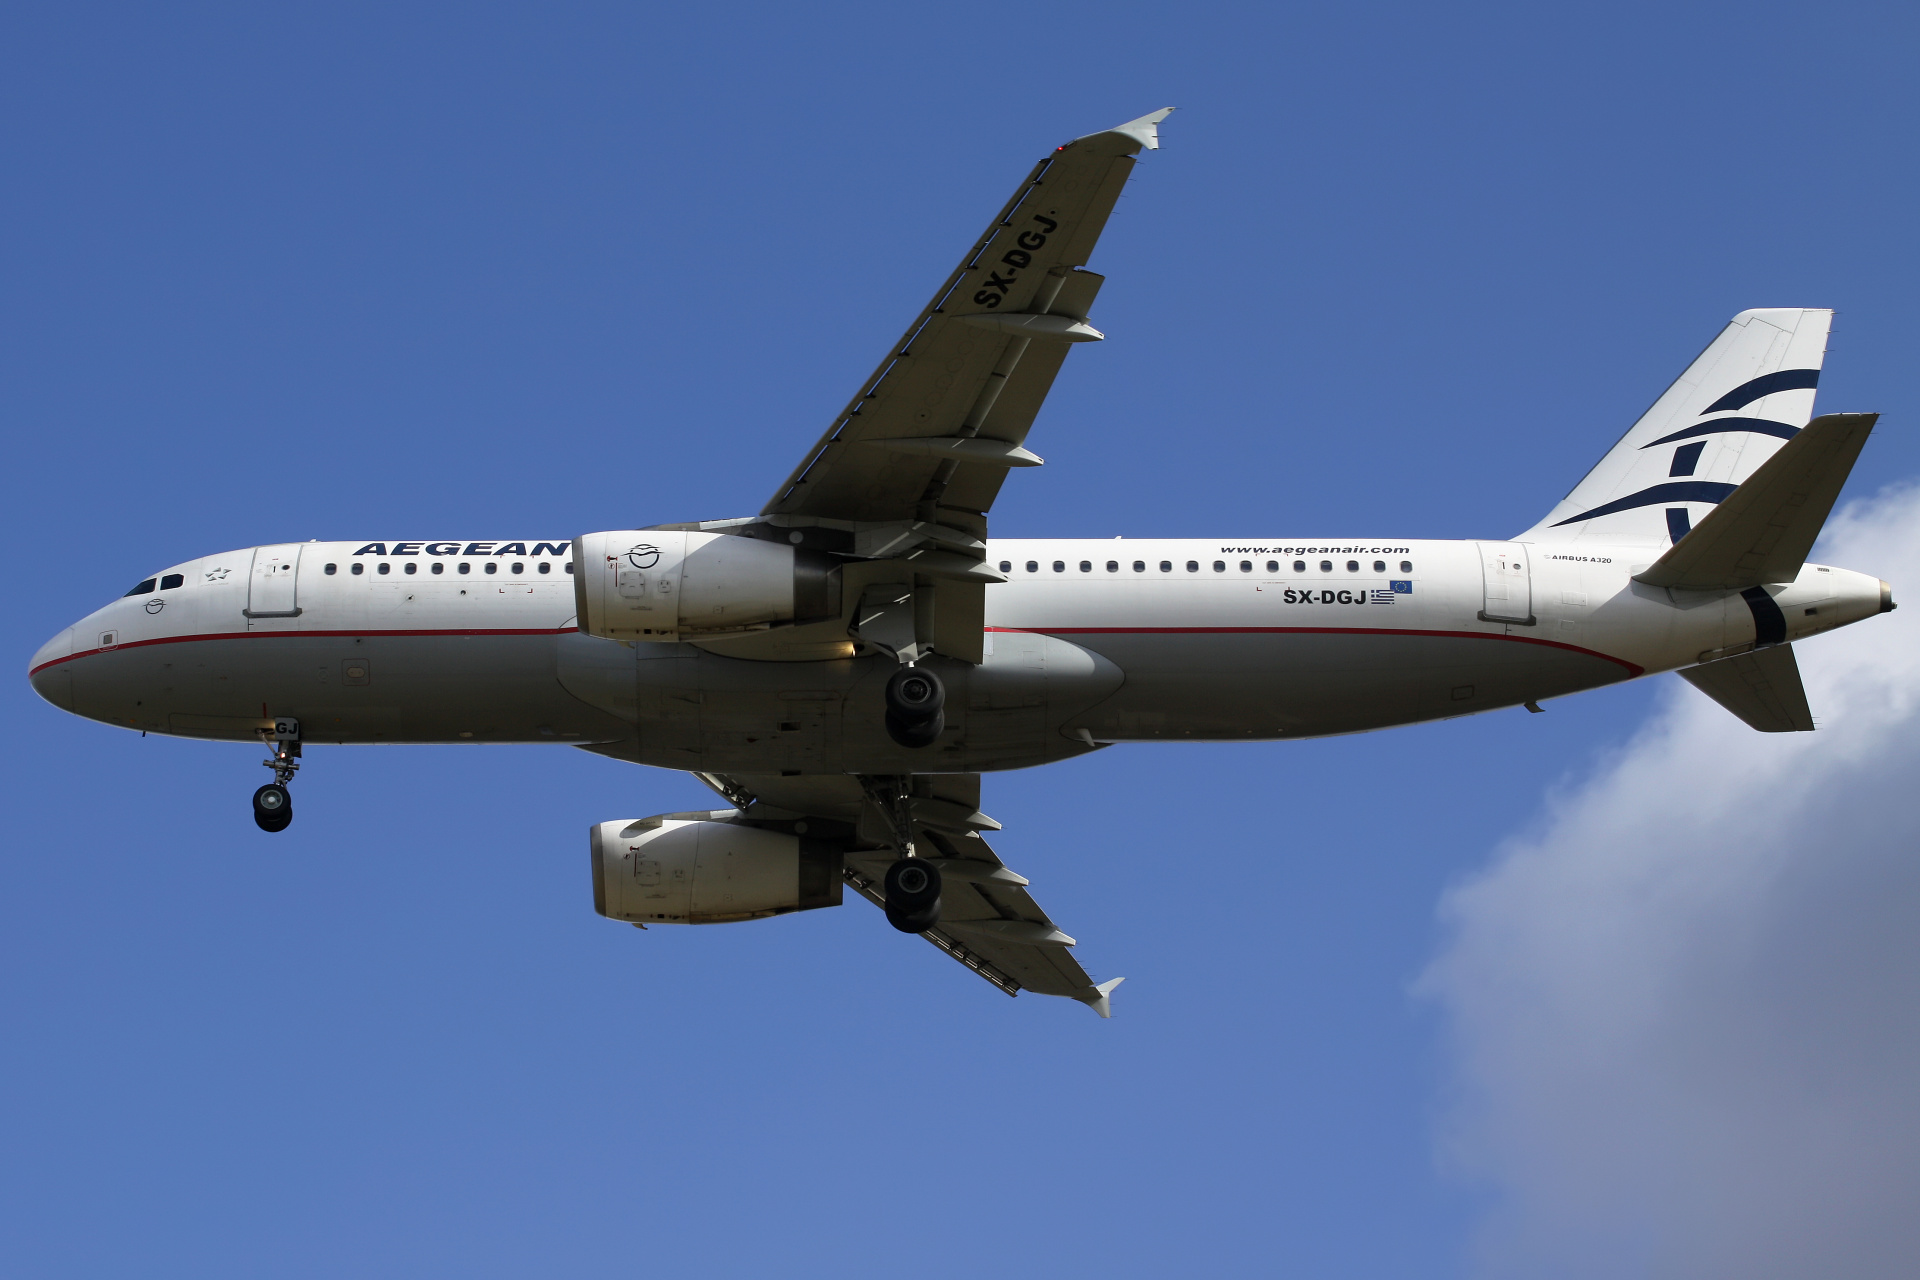 SX-DGJ (Aircraft » EPWA Spotting » Airbus A320-200 » Aegean Airlines)